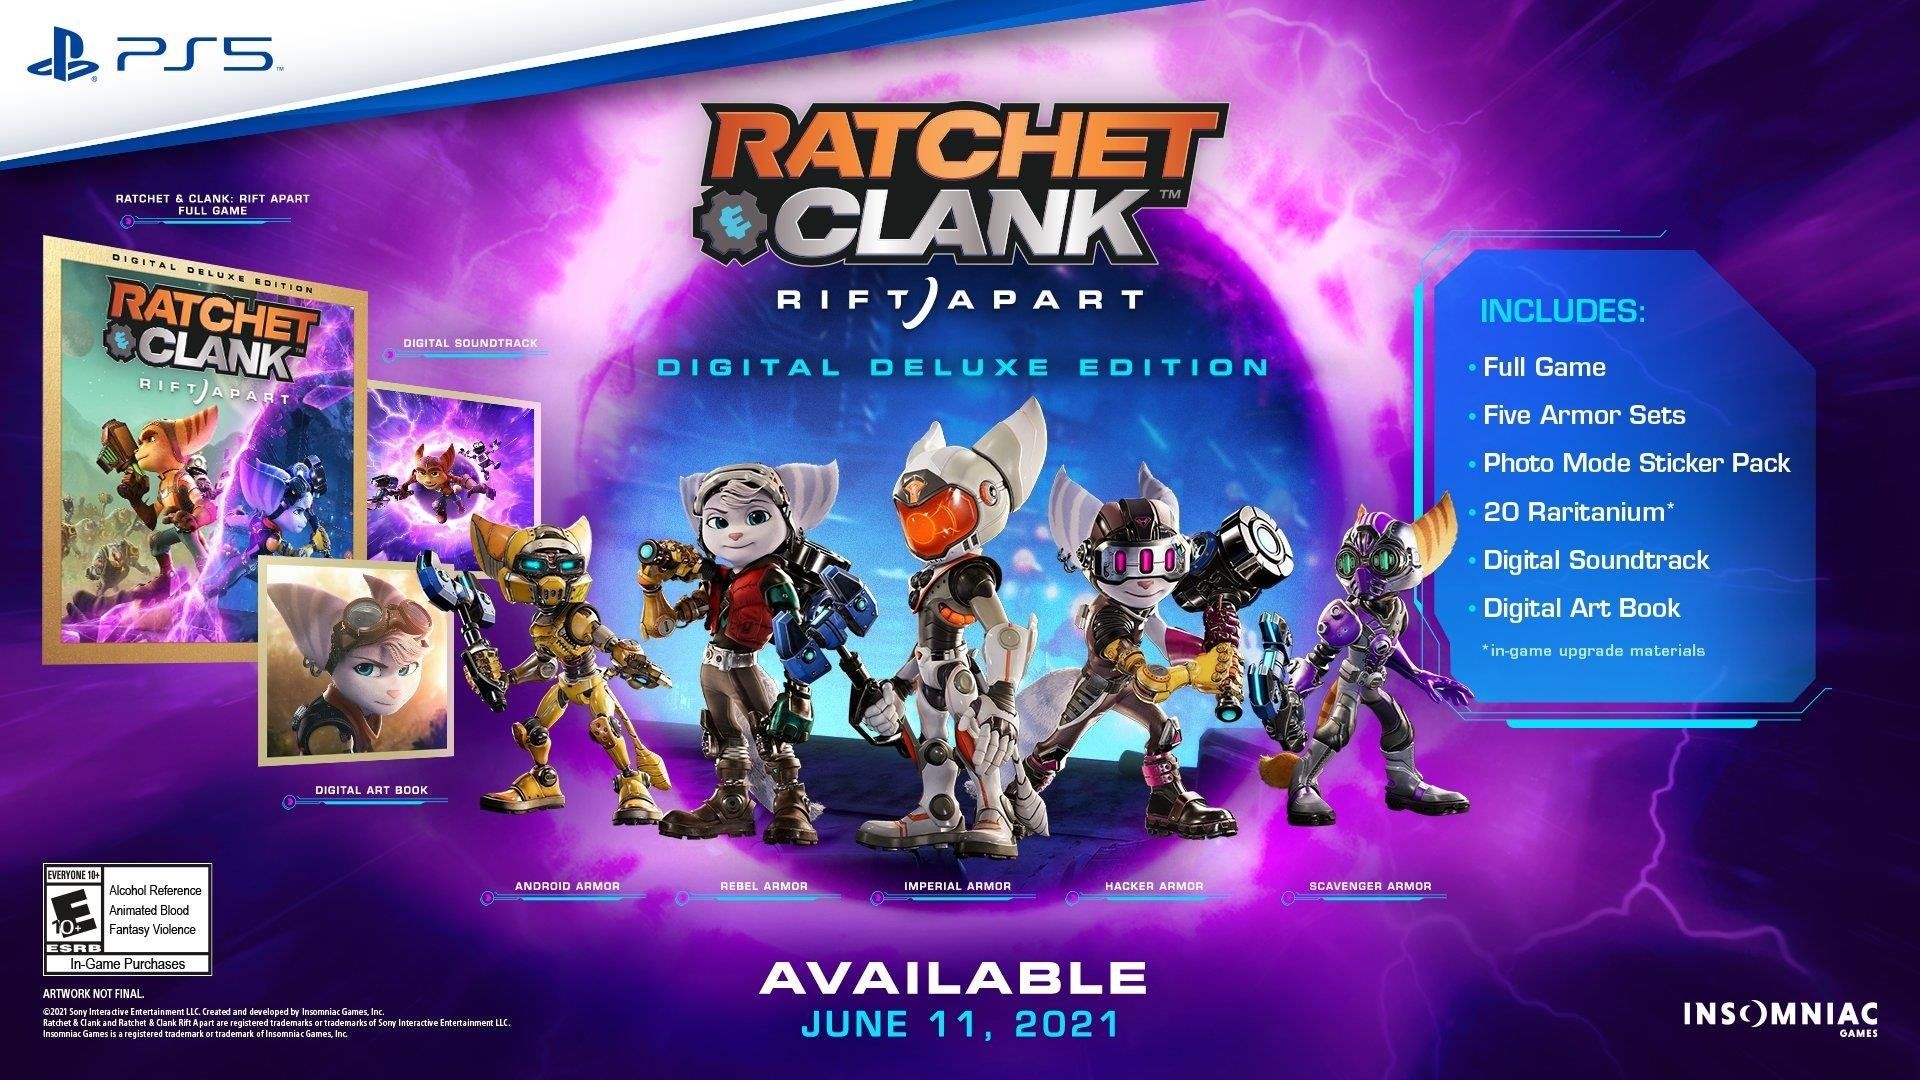 Ratchet & Clank: Rift Apart gets new story details and gameplay trailer